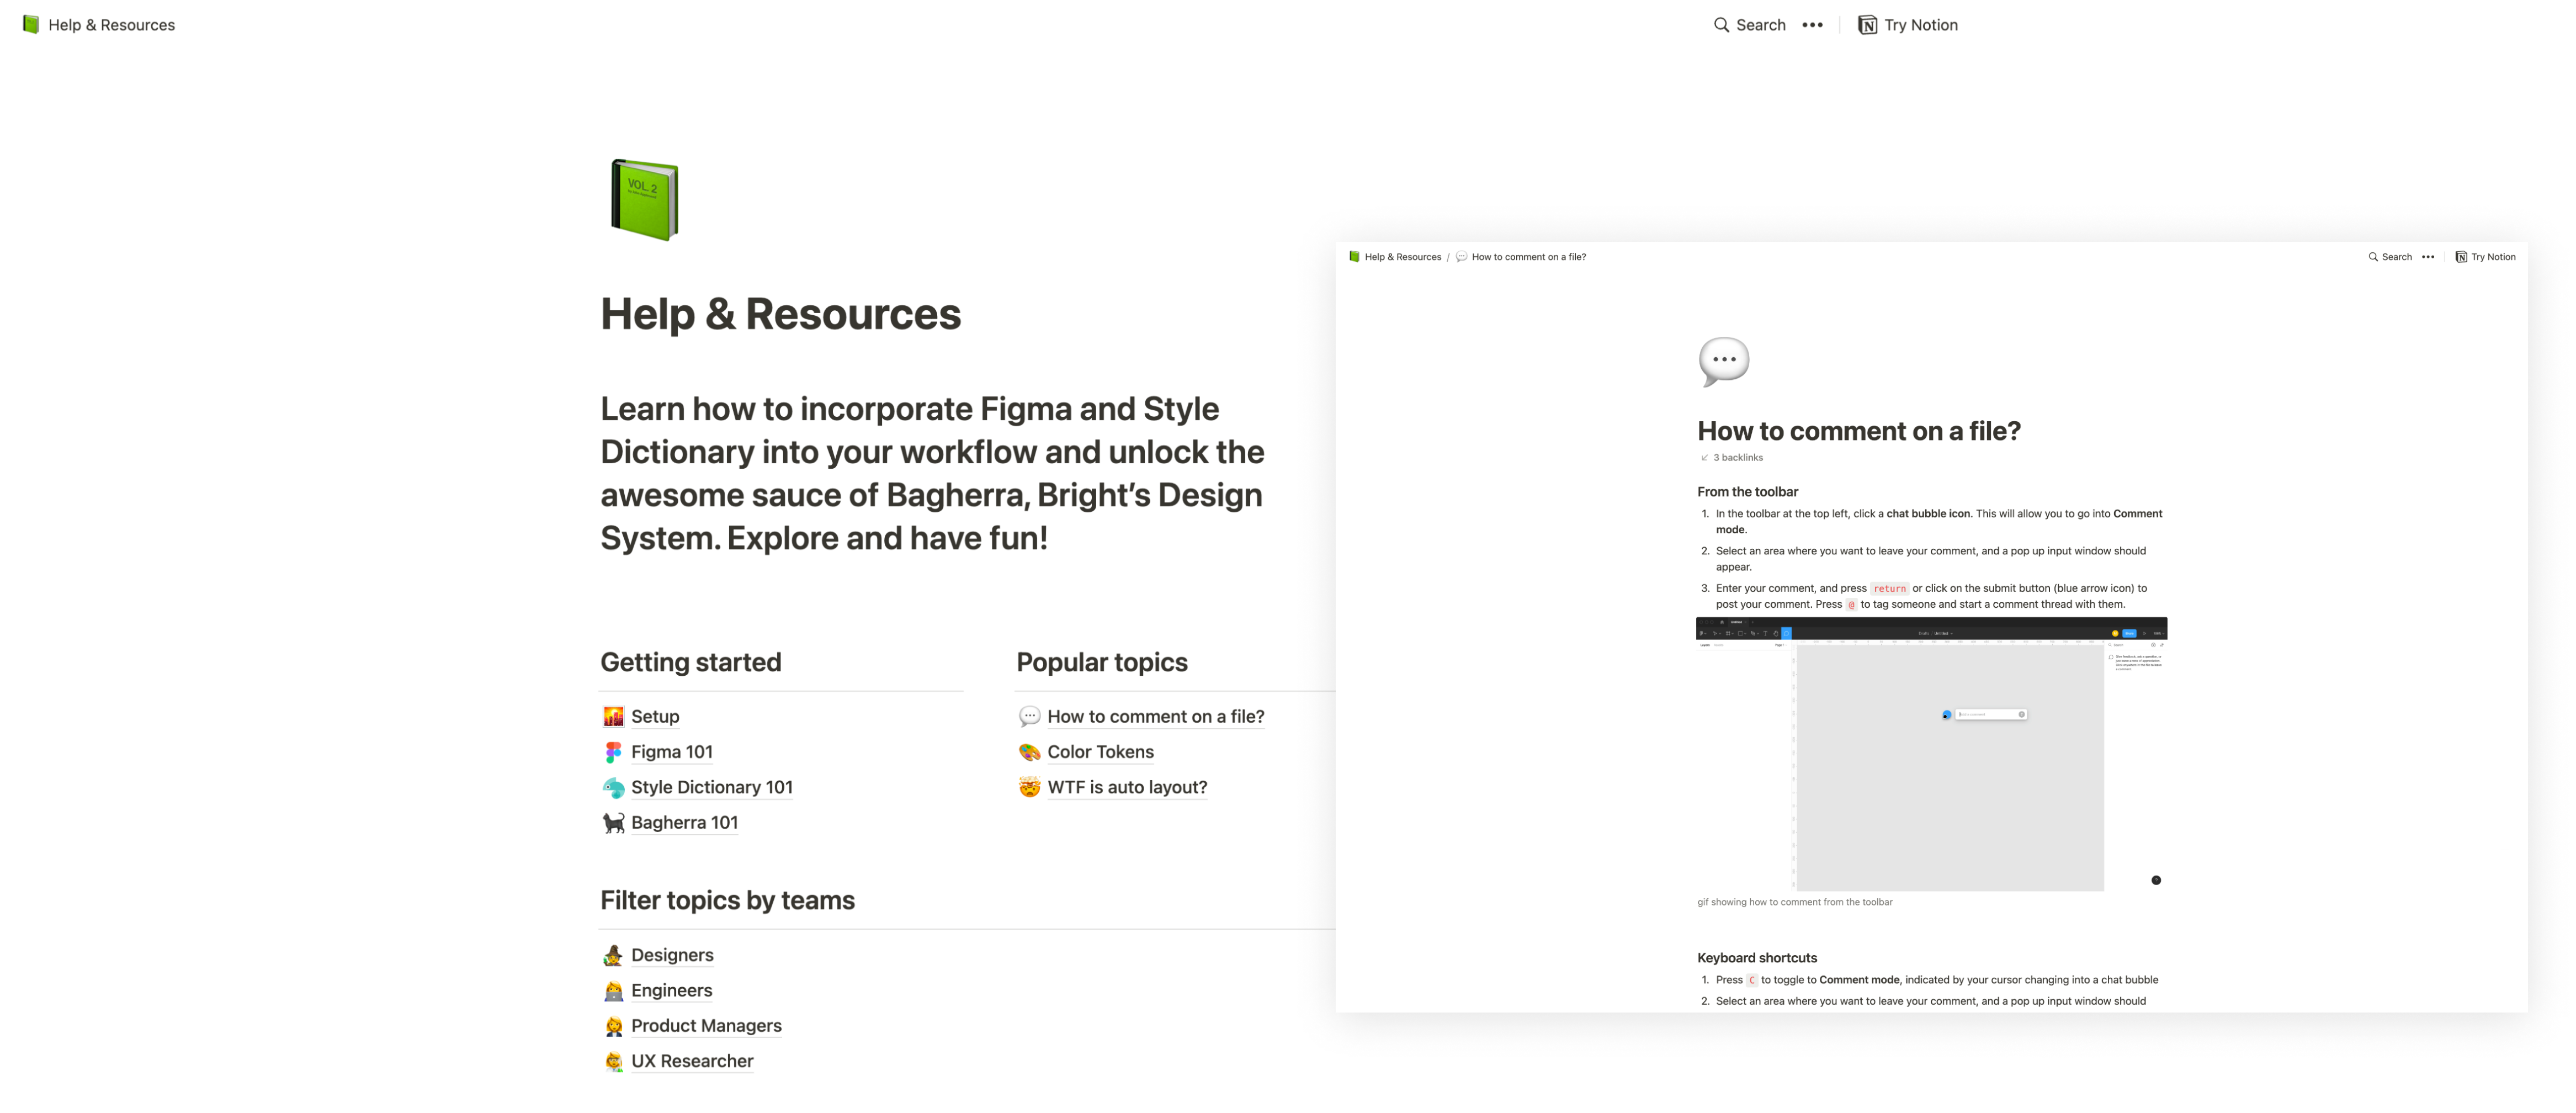 Screenshots of resource hub's home page and “How to comment on a file” page. The resource hub is for teams to learn how to use Bagherra and other internal tools such as Style Dictionary and Figma